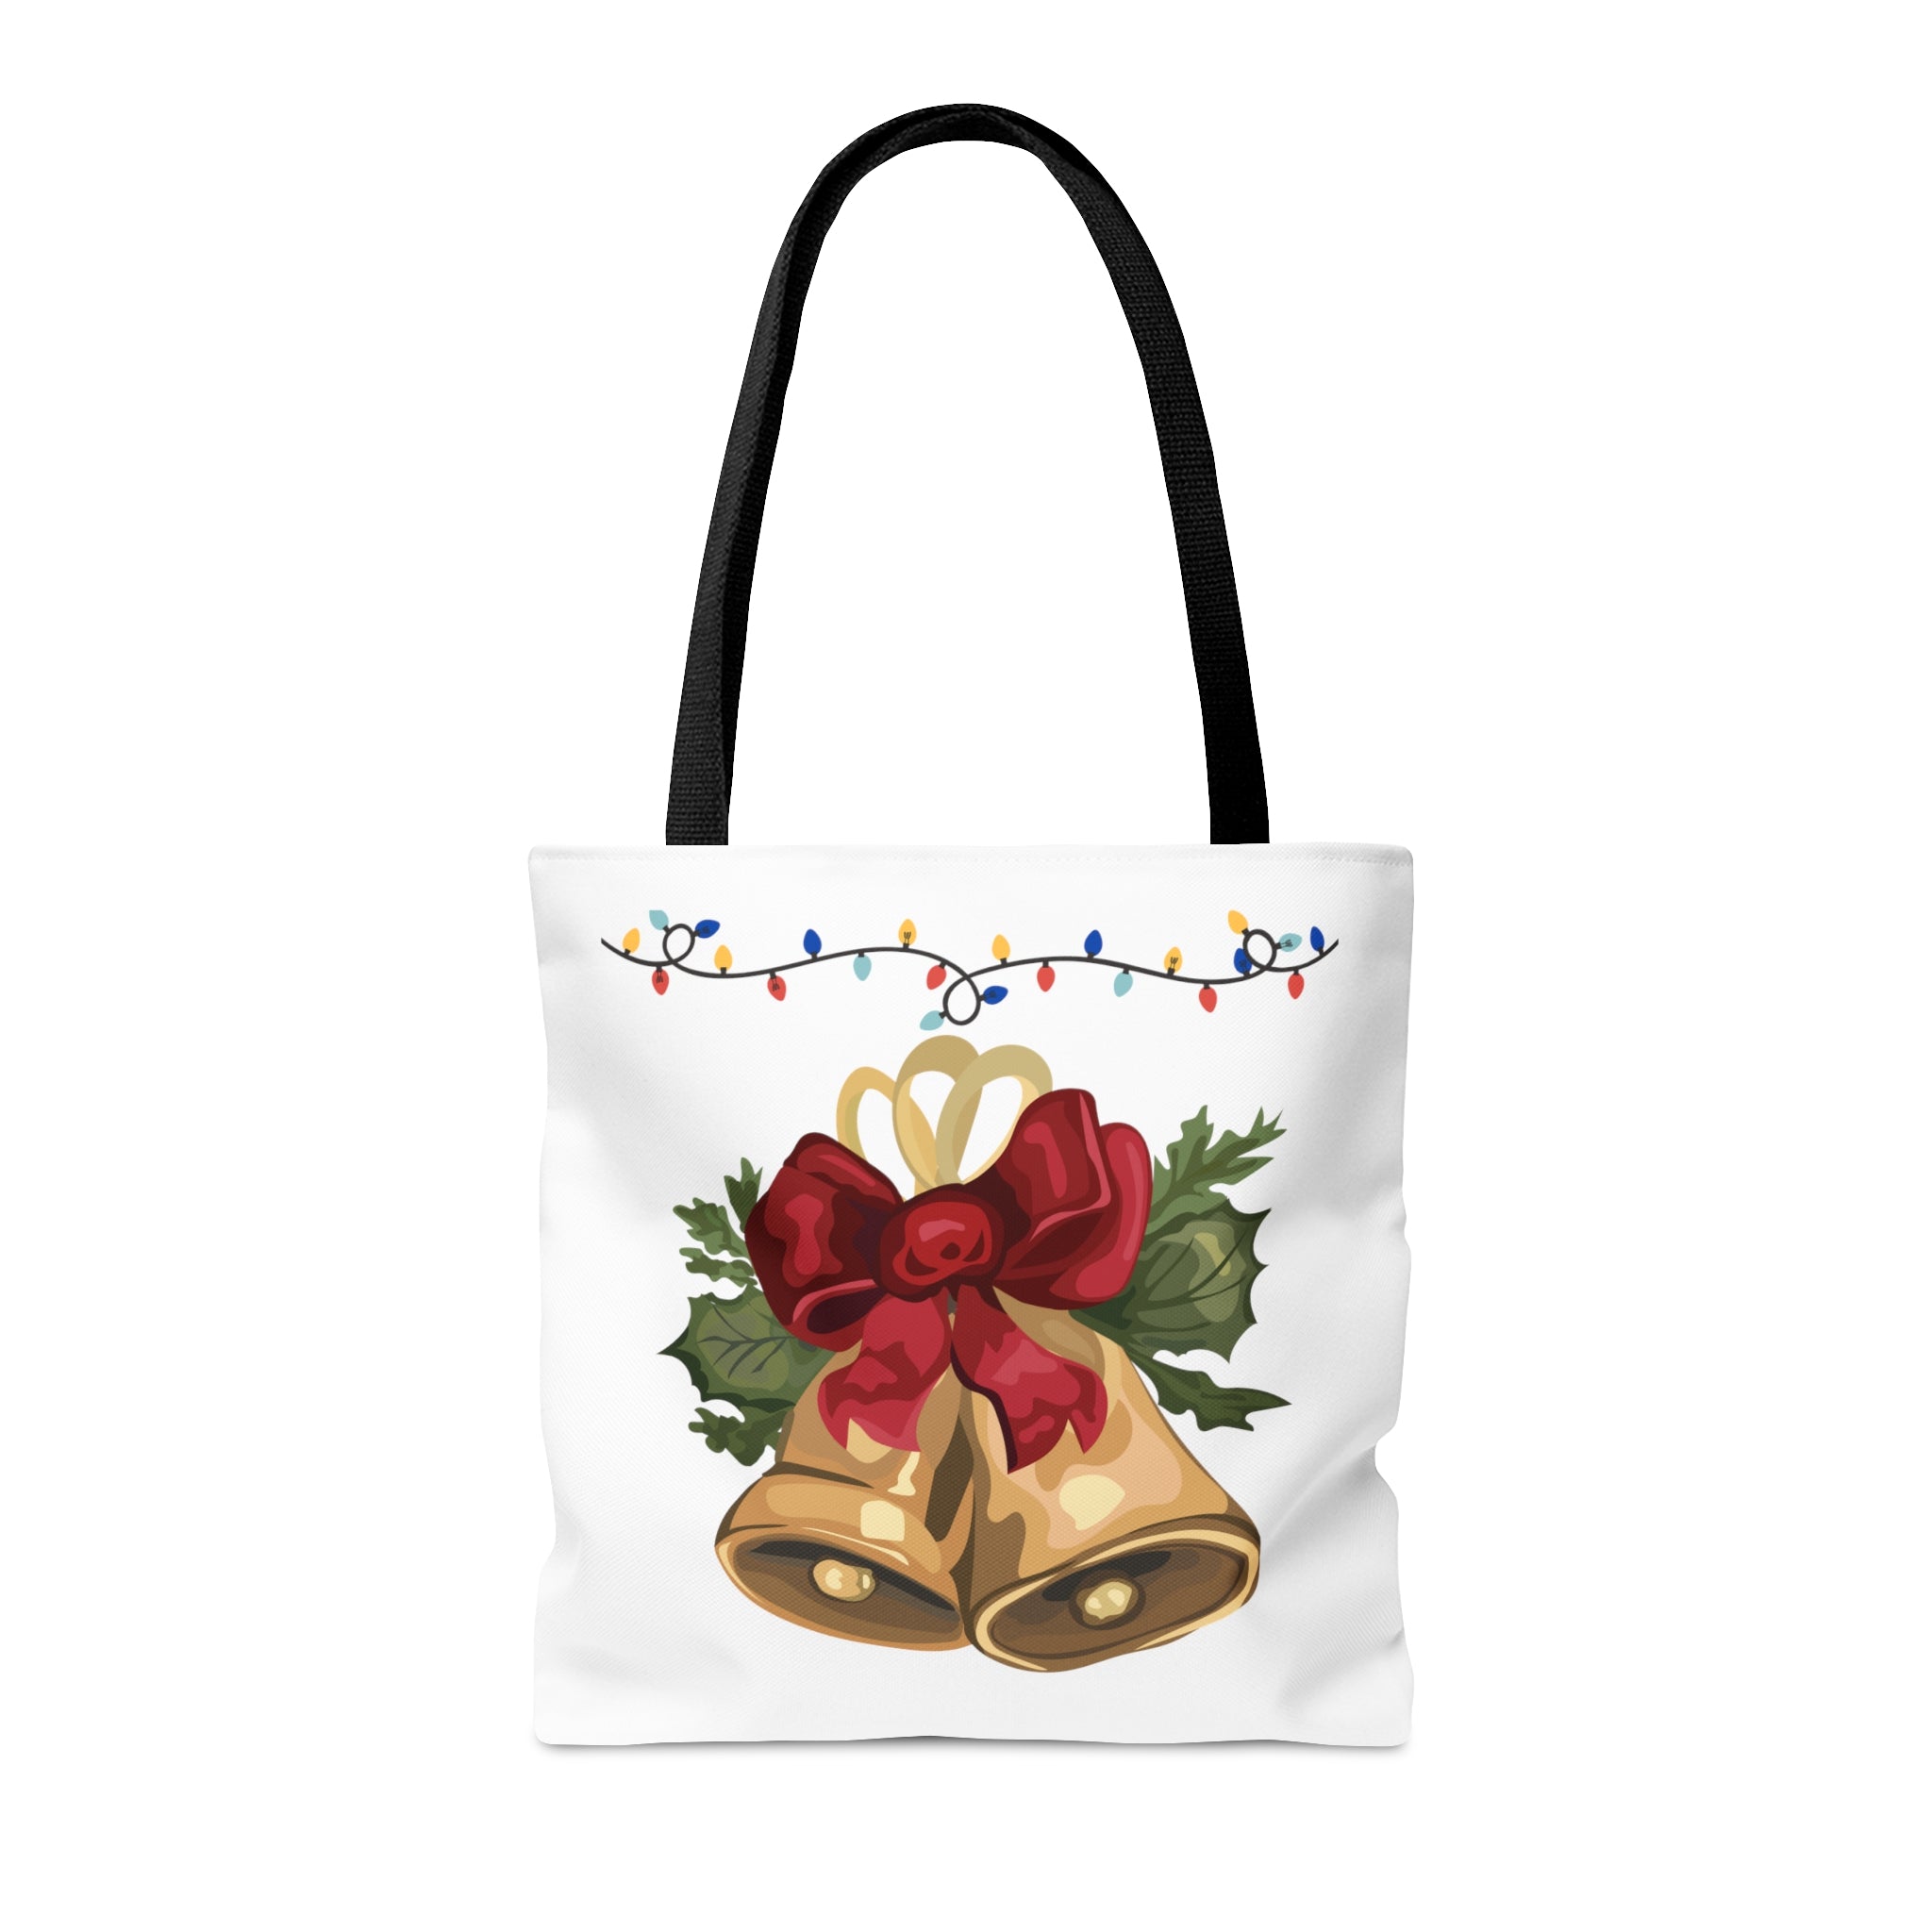 Merry Christmas Tote Bags Green, Reusable Canvas Tote Bags, Available in Different Size